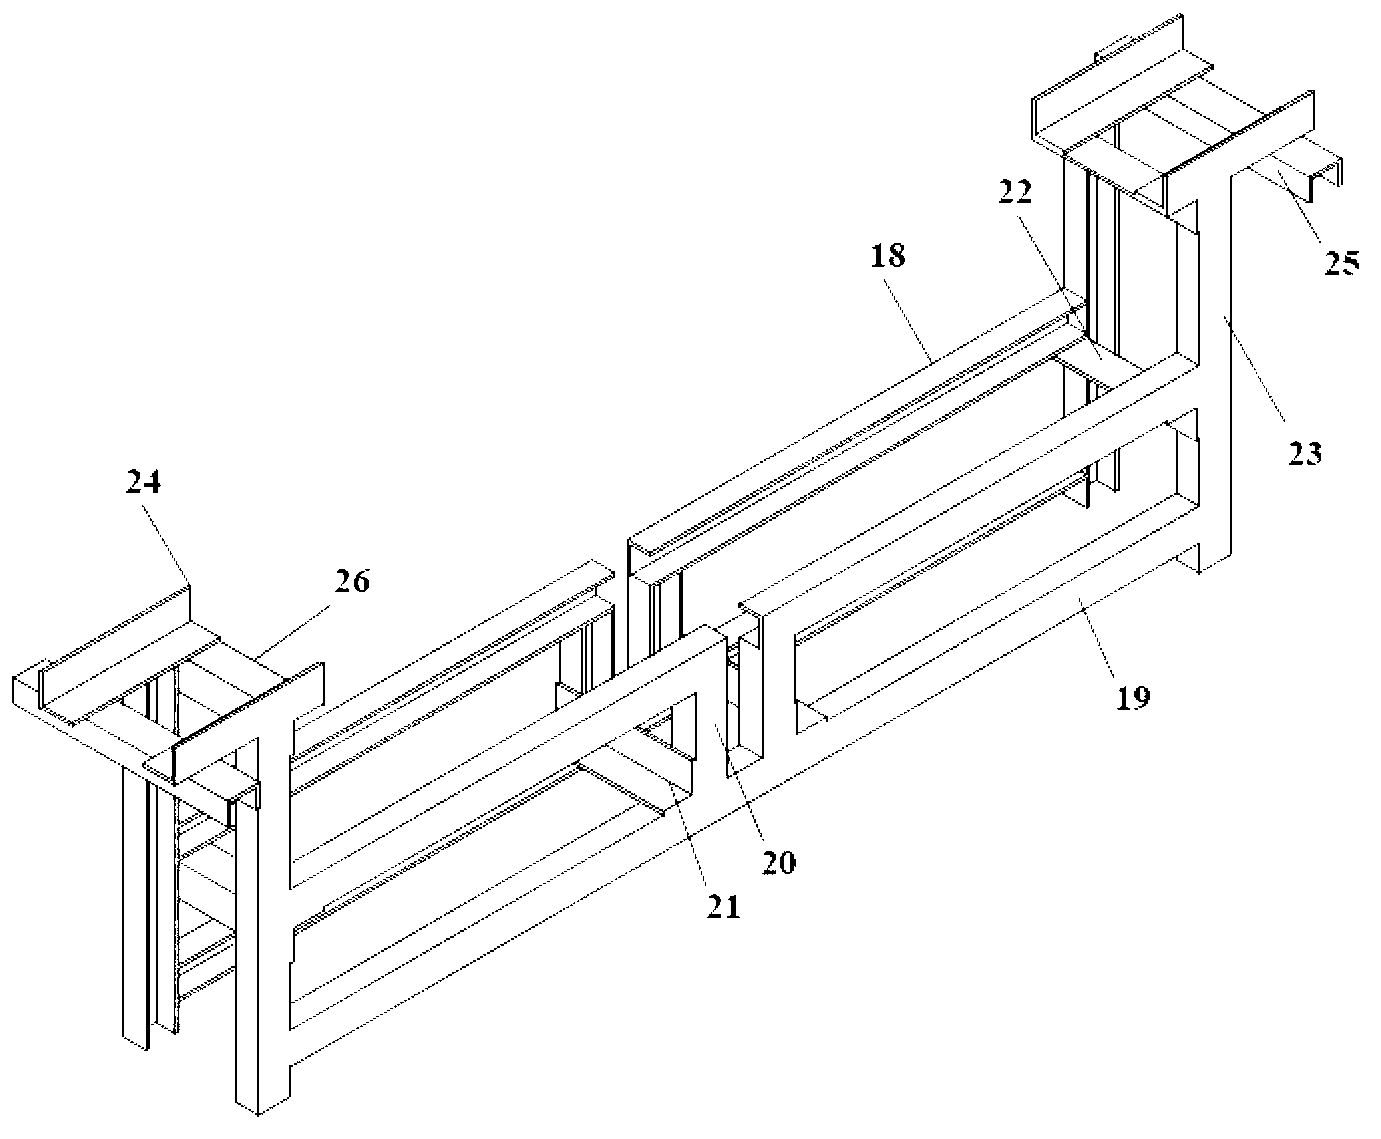 Resistance testing device for cable-towed ship model